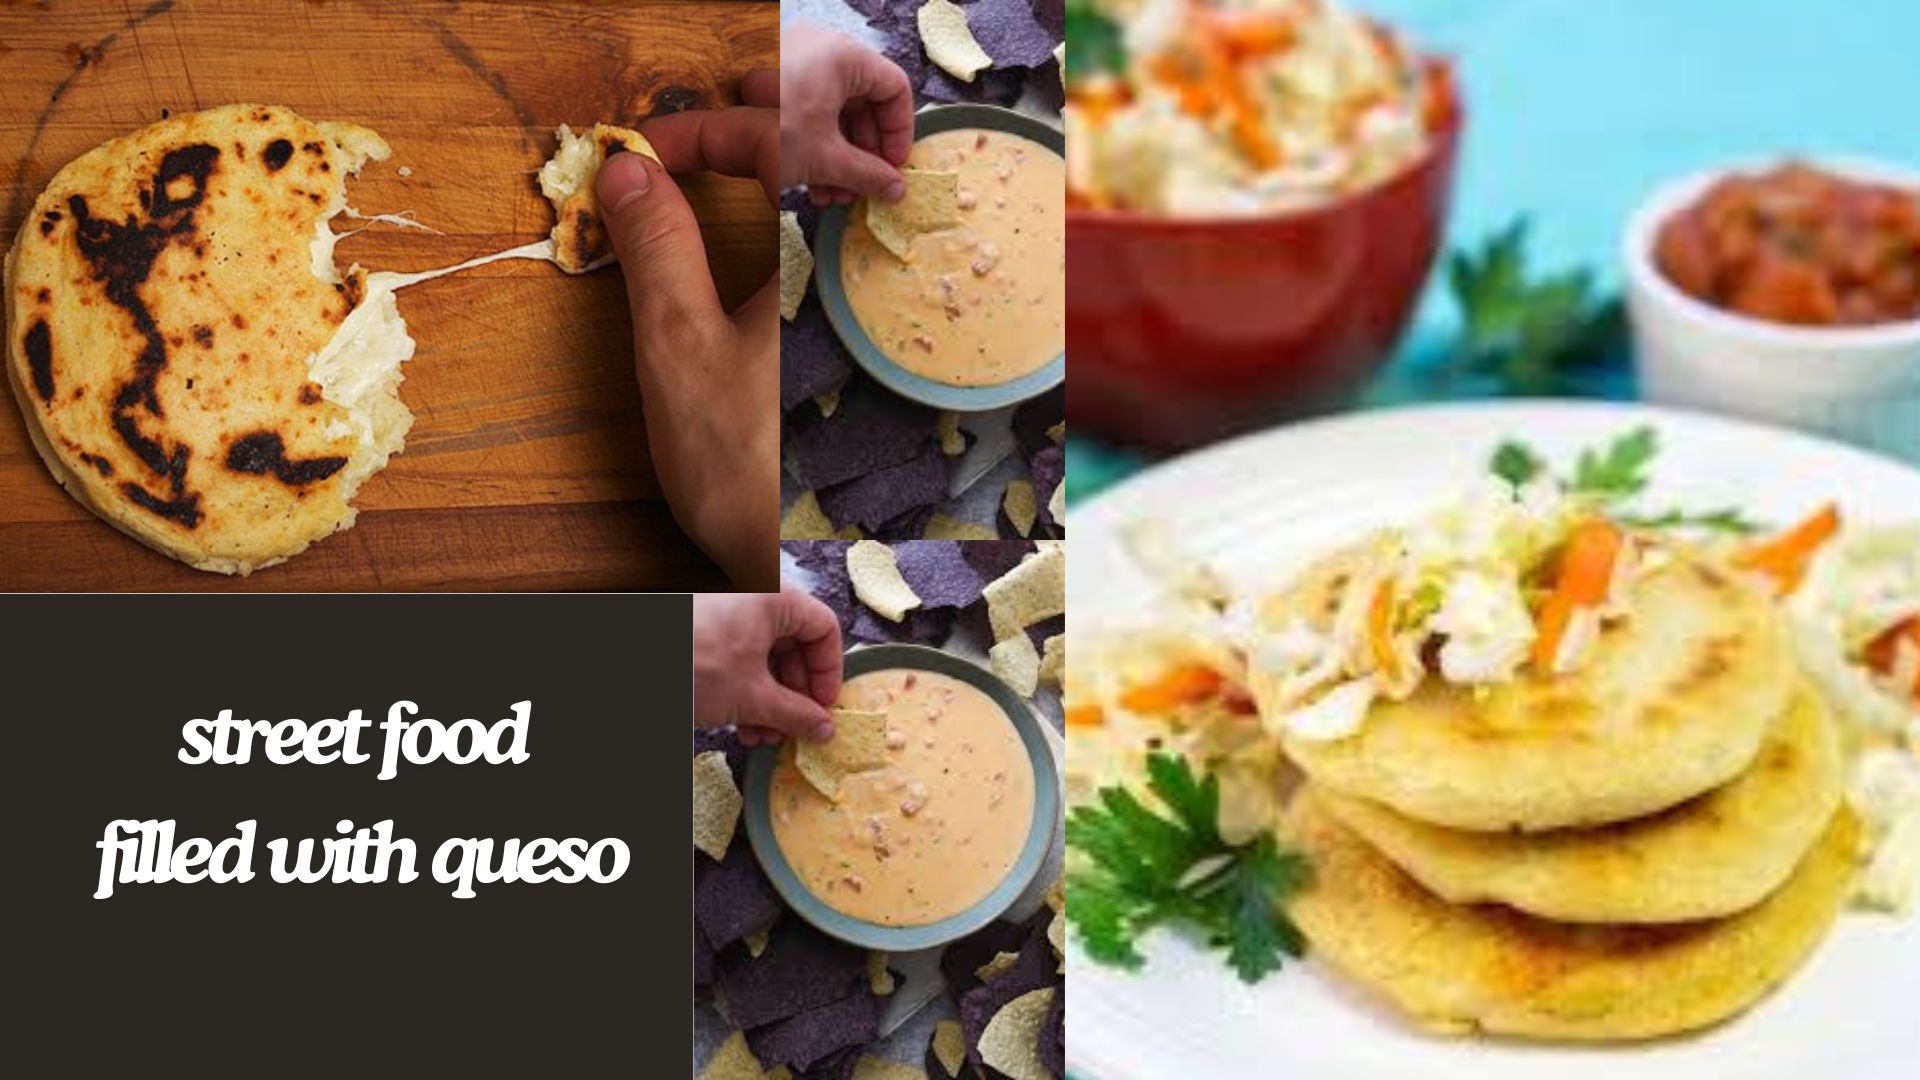 Popular street food filled with queso